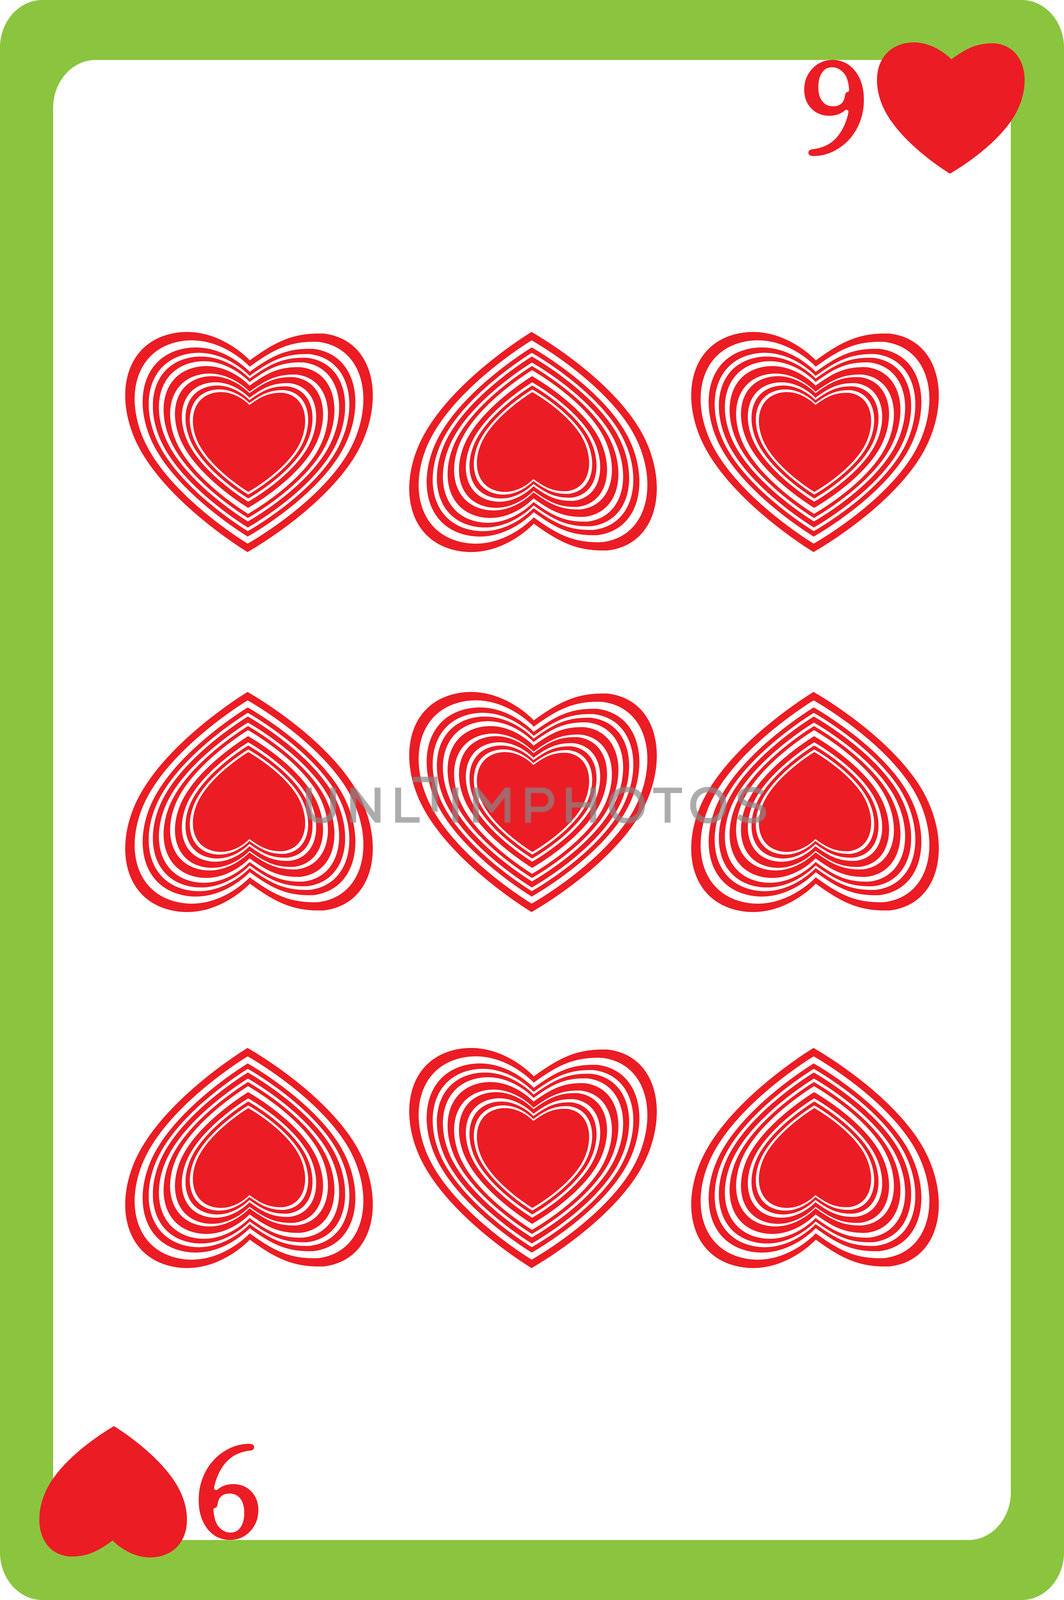 Scale hand drawn illustration of a playing card representing the nine of hearts, one element of a deck